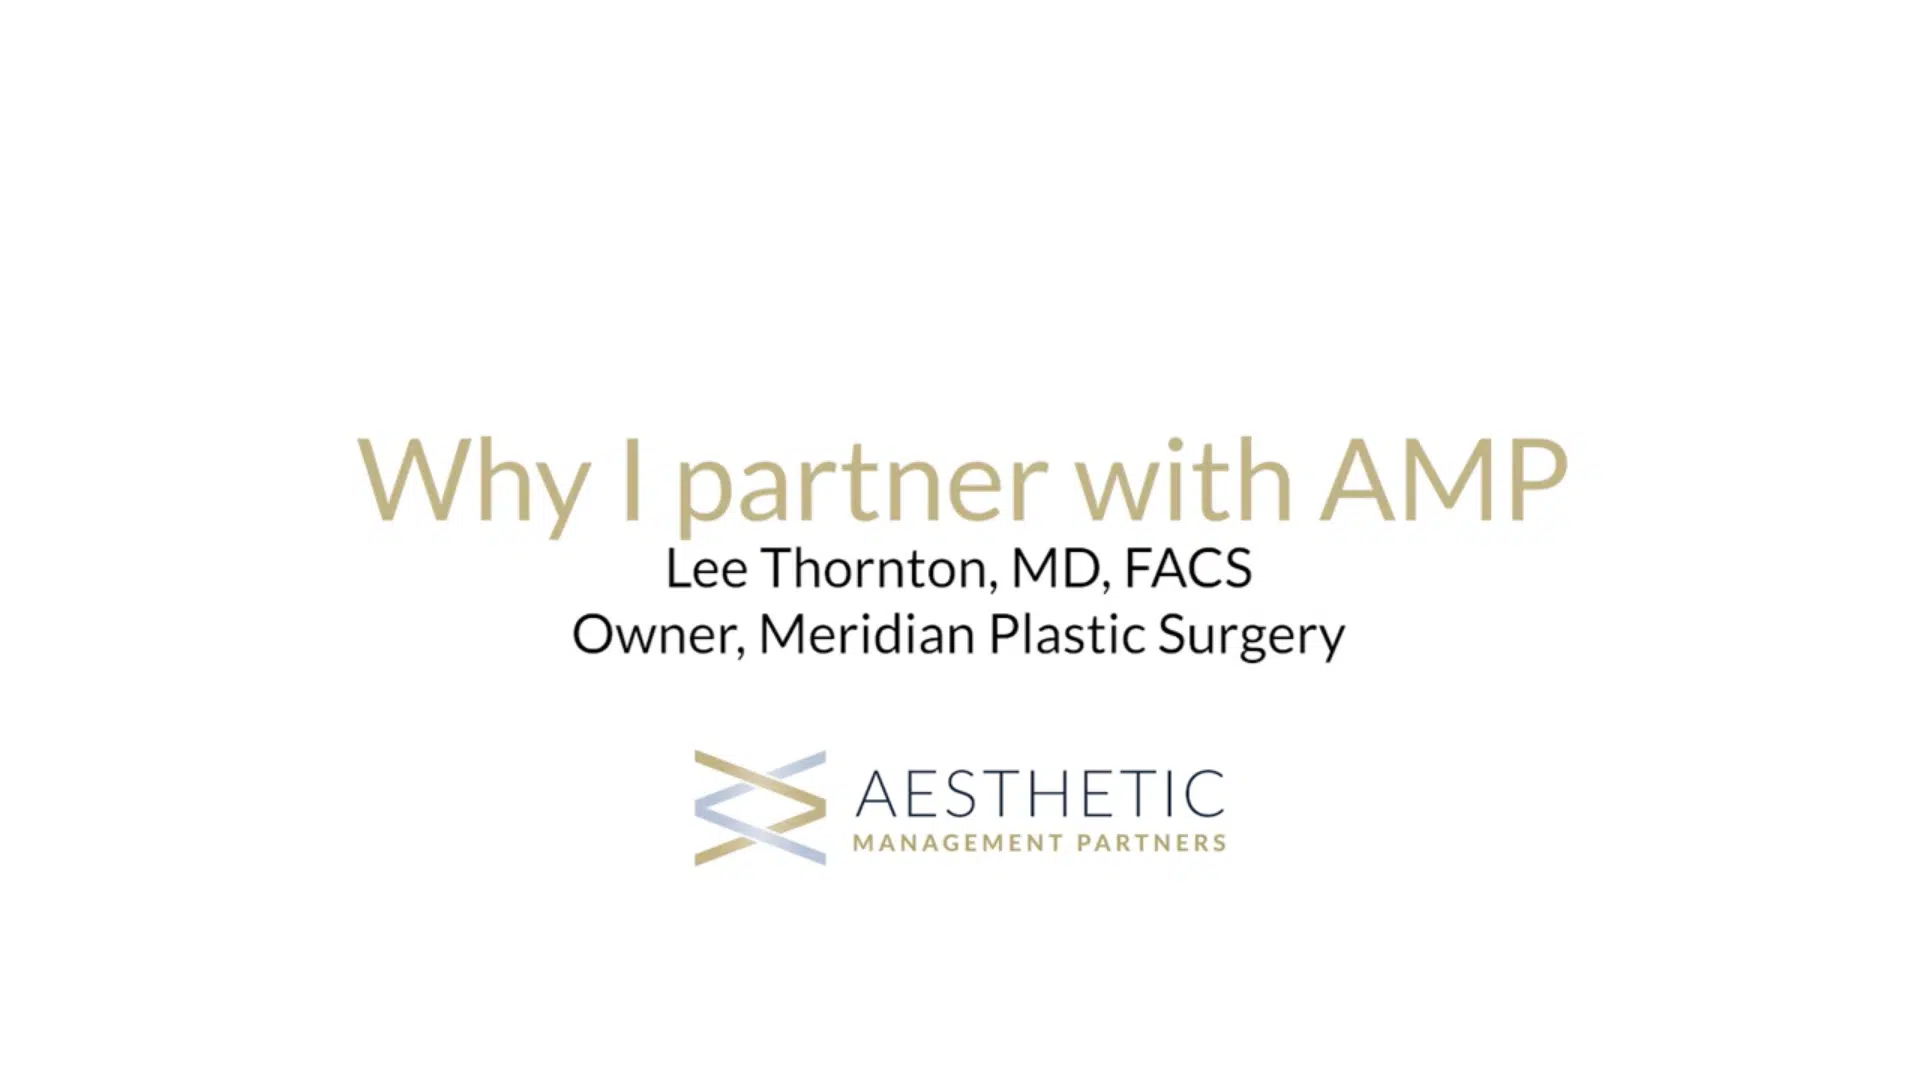 Lee Thornton, MD, FACS, is a board-certified plastic surgeon who explains why he's decided to partner with Aesthetic Management Partners.